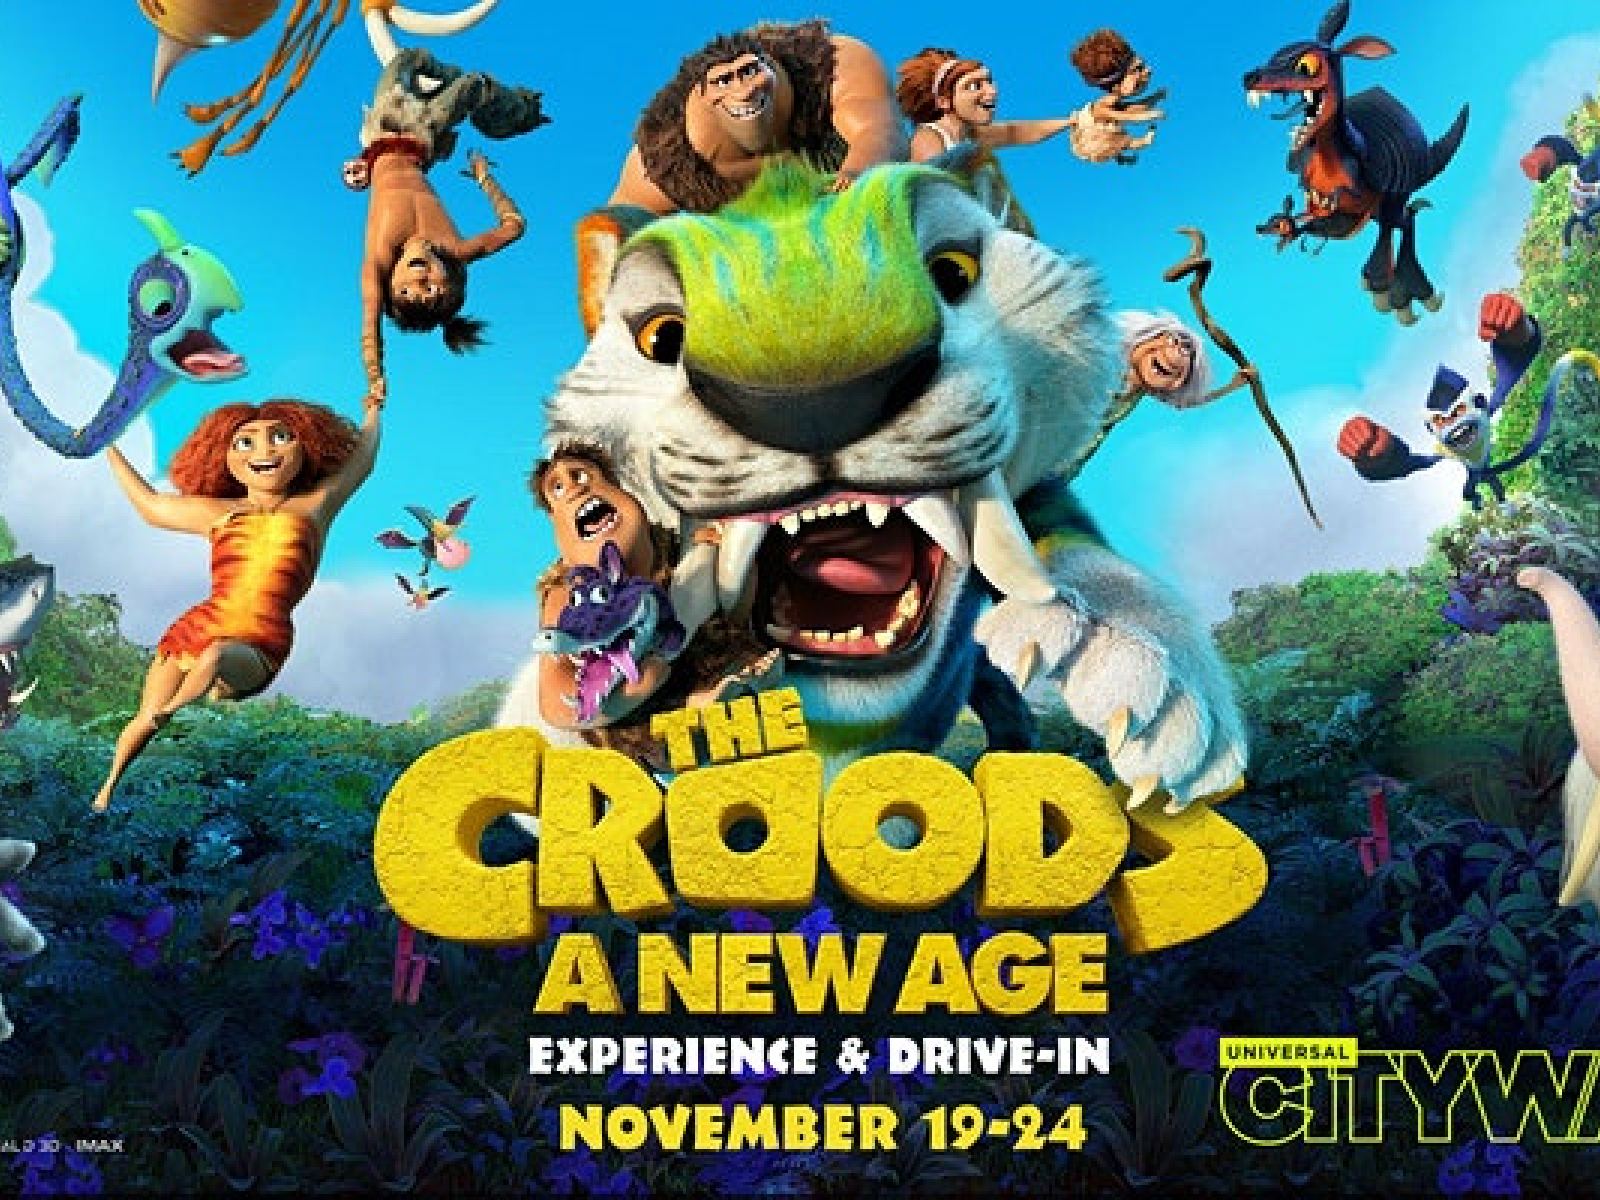 DRIVE IN SCREENING AND EXPERIENCE OF THE CROODS: A NEW AGE (OPENING NIGHT). Discover Los Angeles